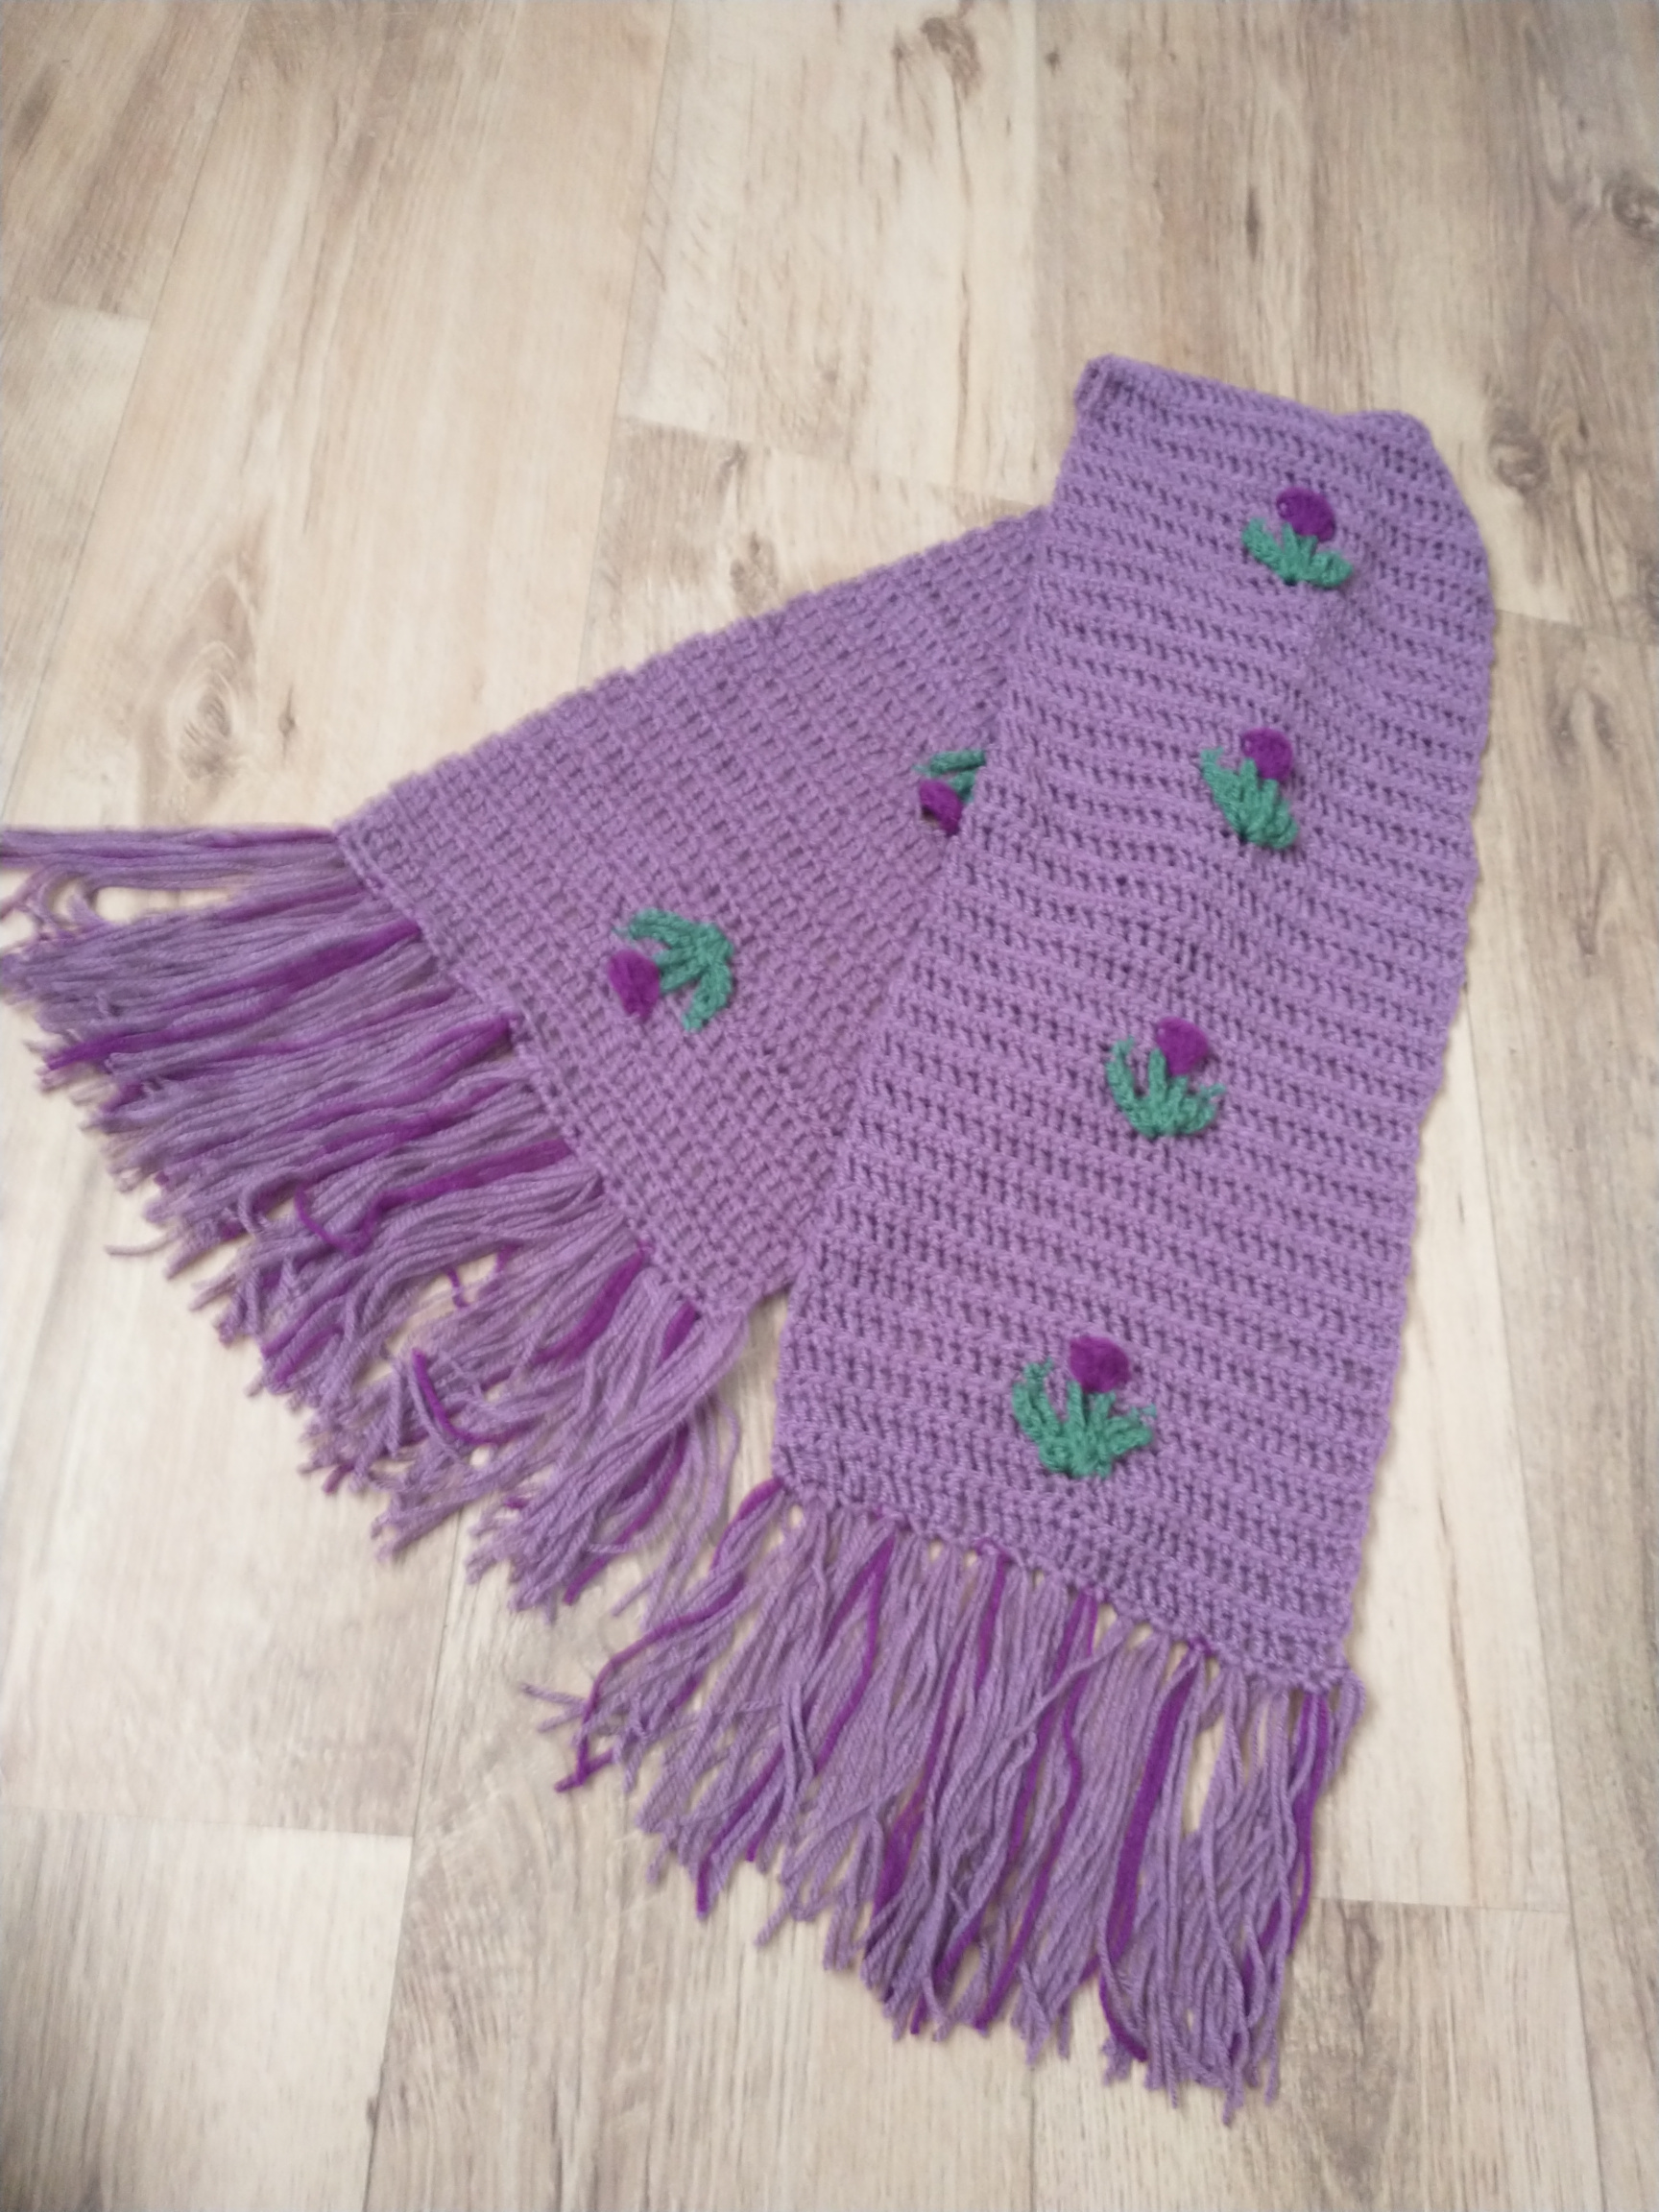 A photo of a purple crochet scarf with thistles in darker purple and green evenly spaced up the centre. The scarf has a fringe made up of the lighter and darker purples yarns